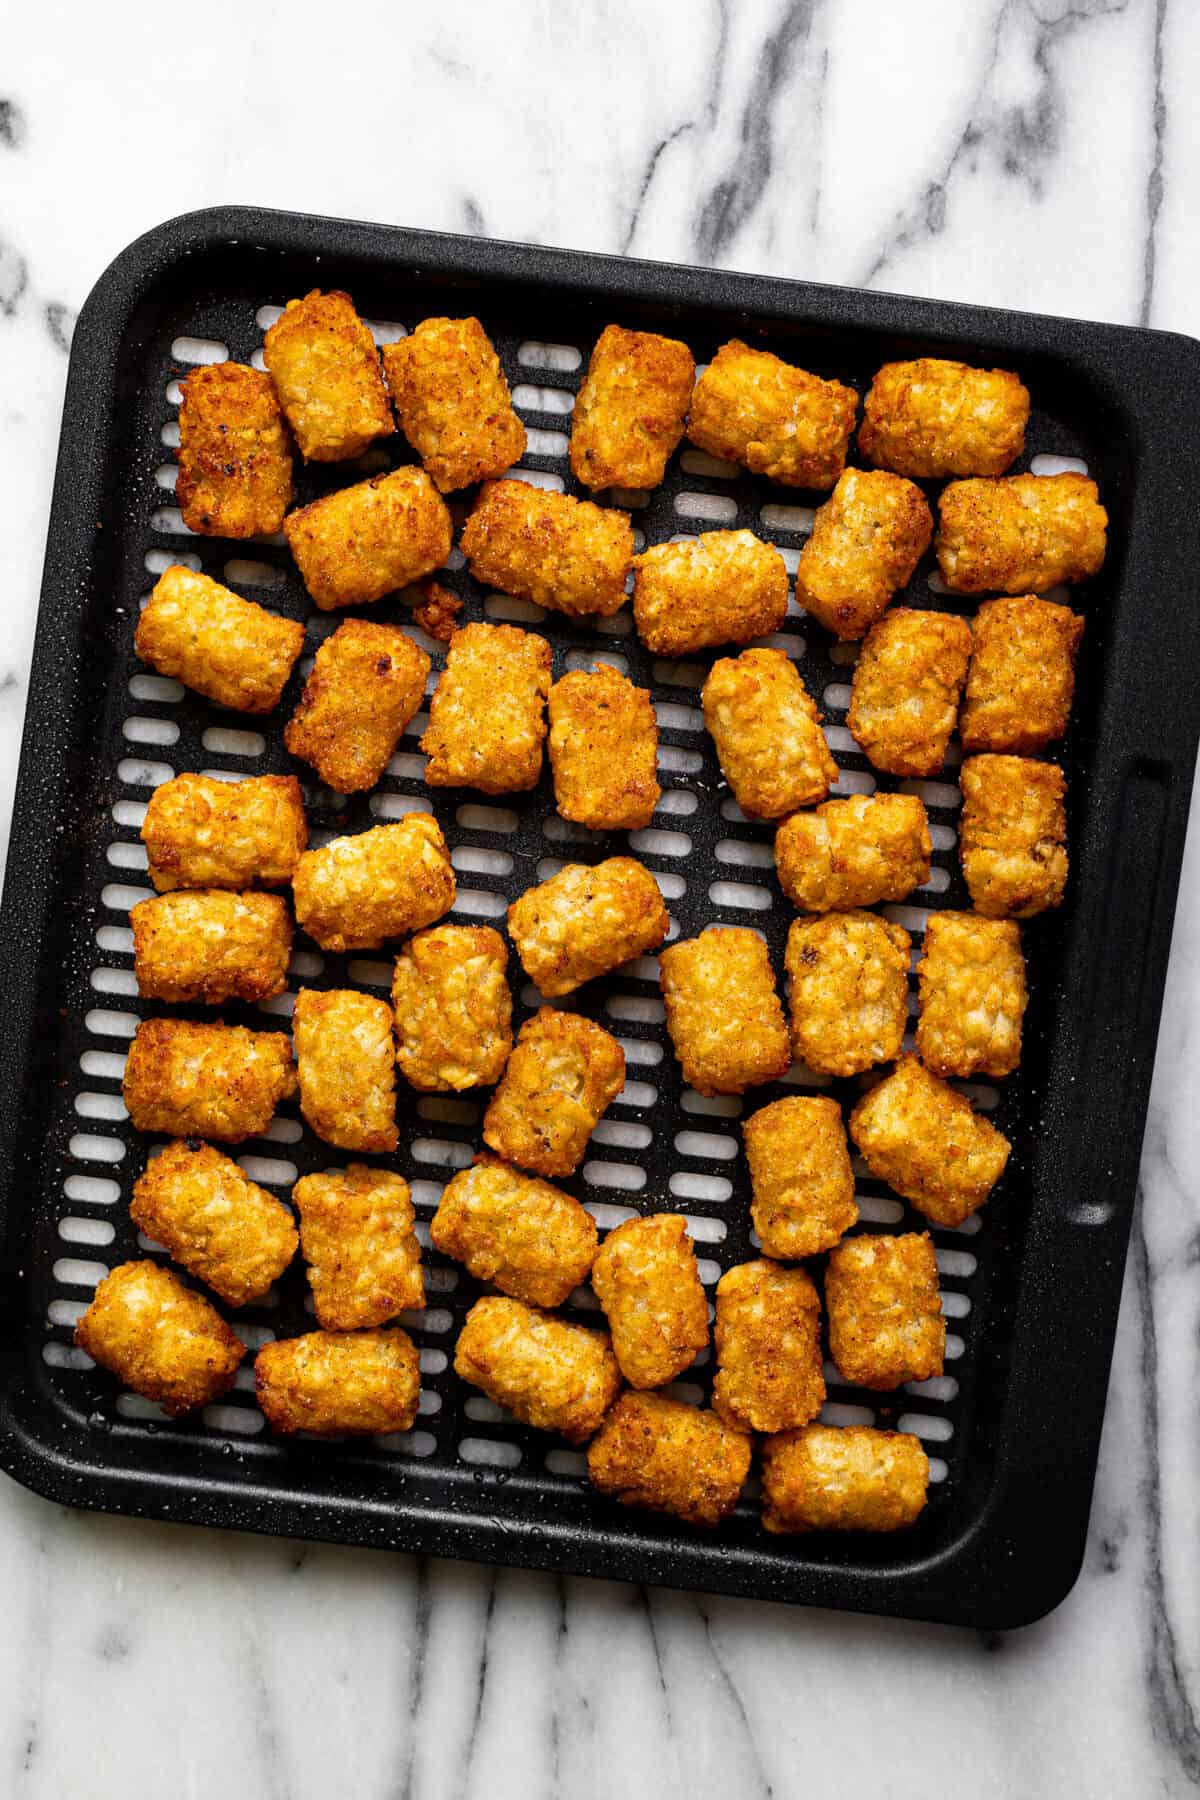 Black air fryer tray with crispy tater tots on it.